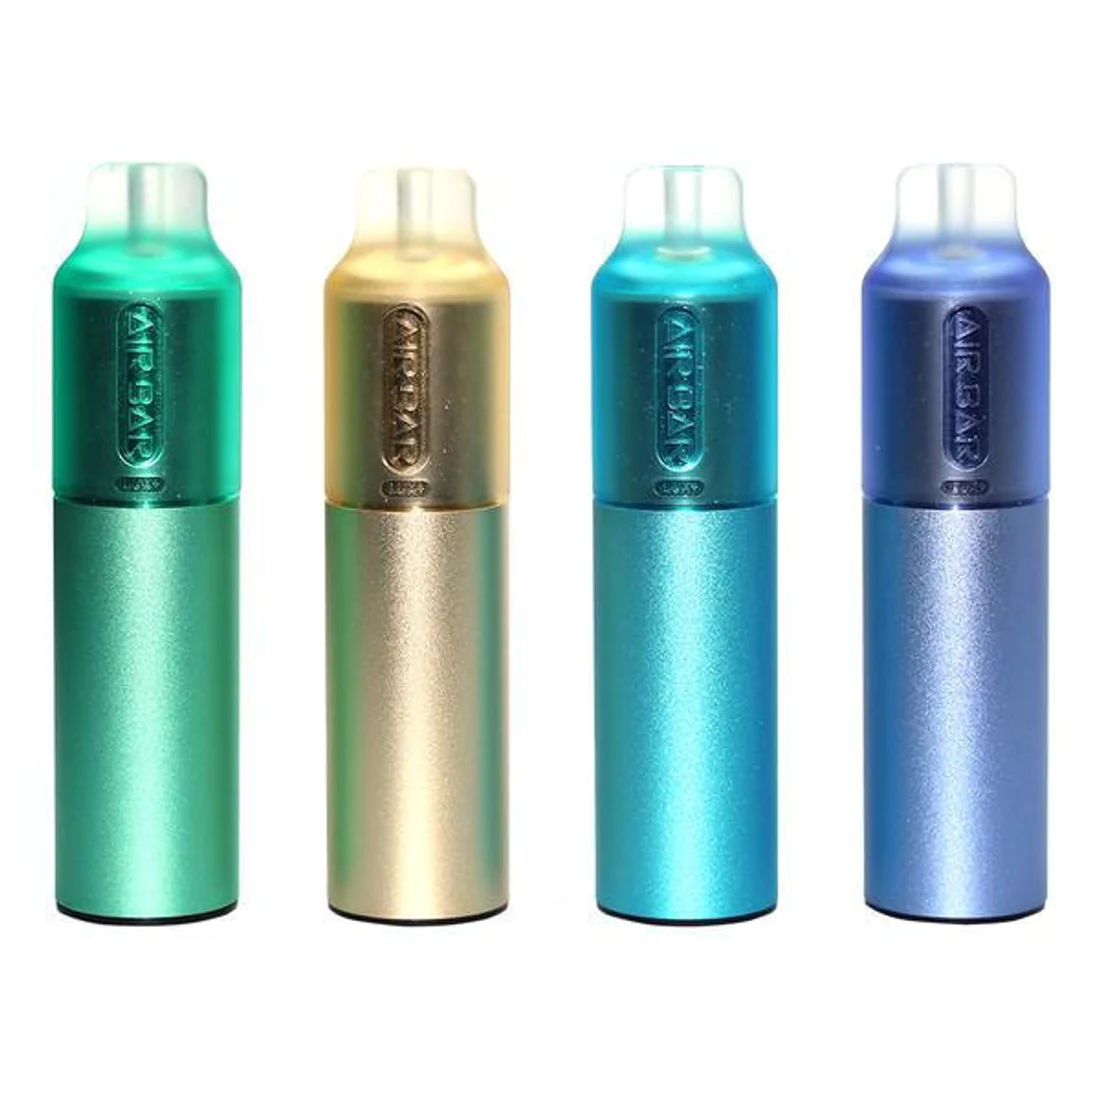 Introducing the Air Bar Lux Plus Disposable Vape